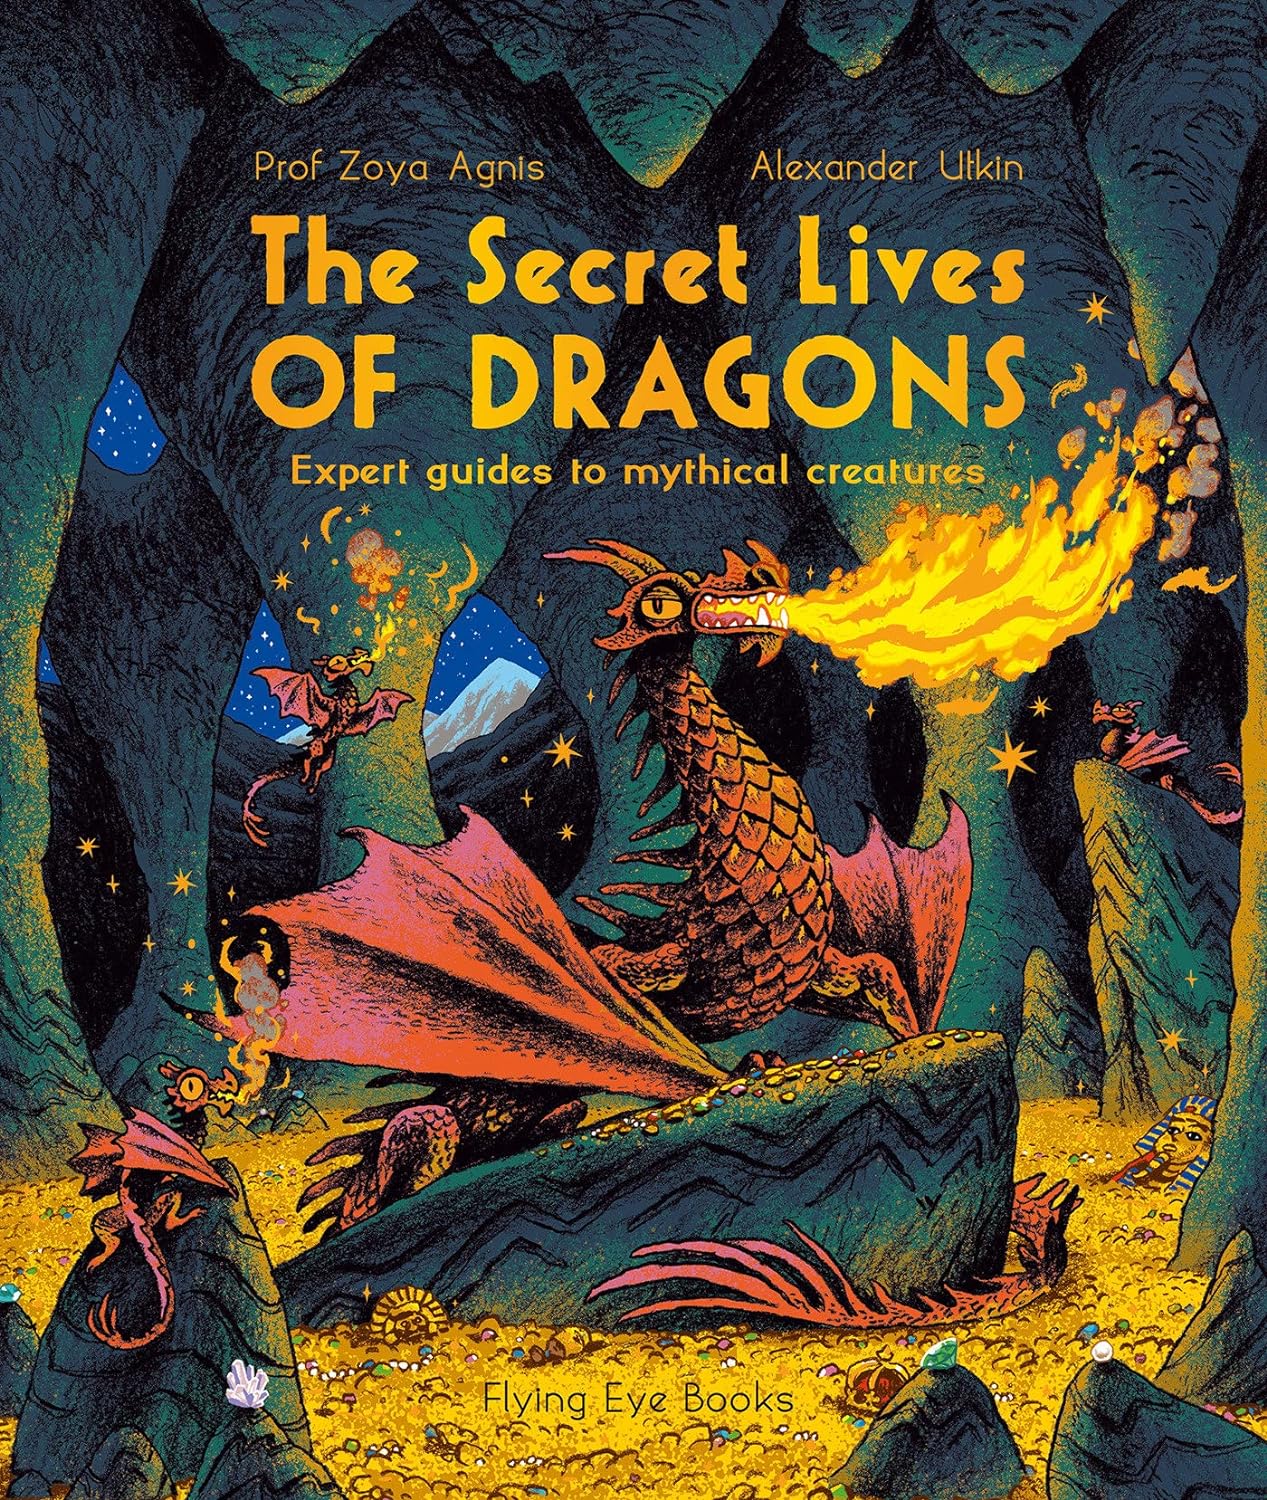 ONE IS A GIFT FOR COSMIC ACADEMY The Secret Lives of Dragons